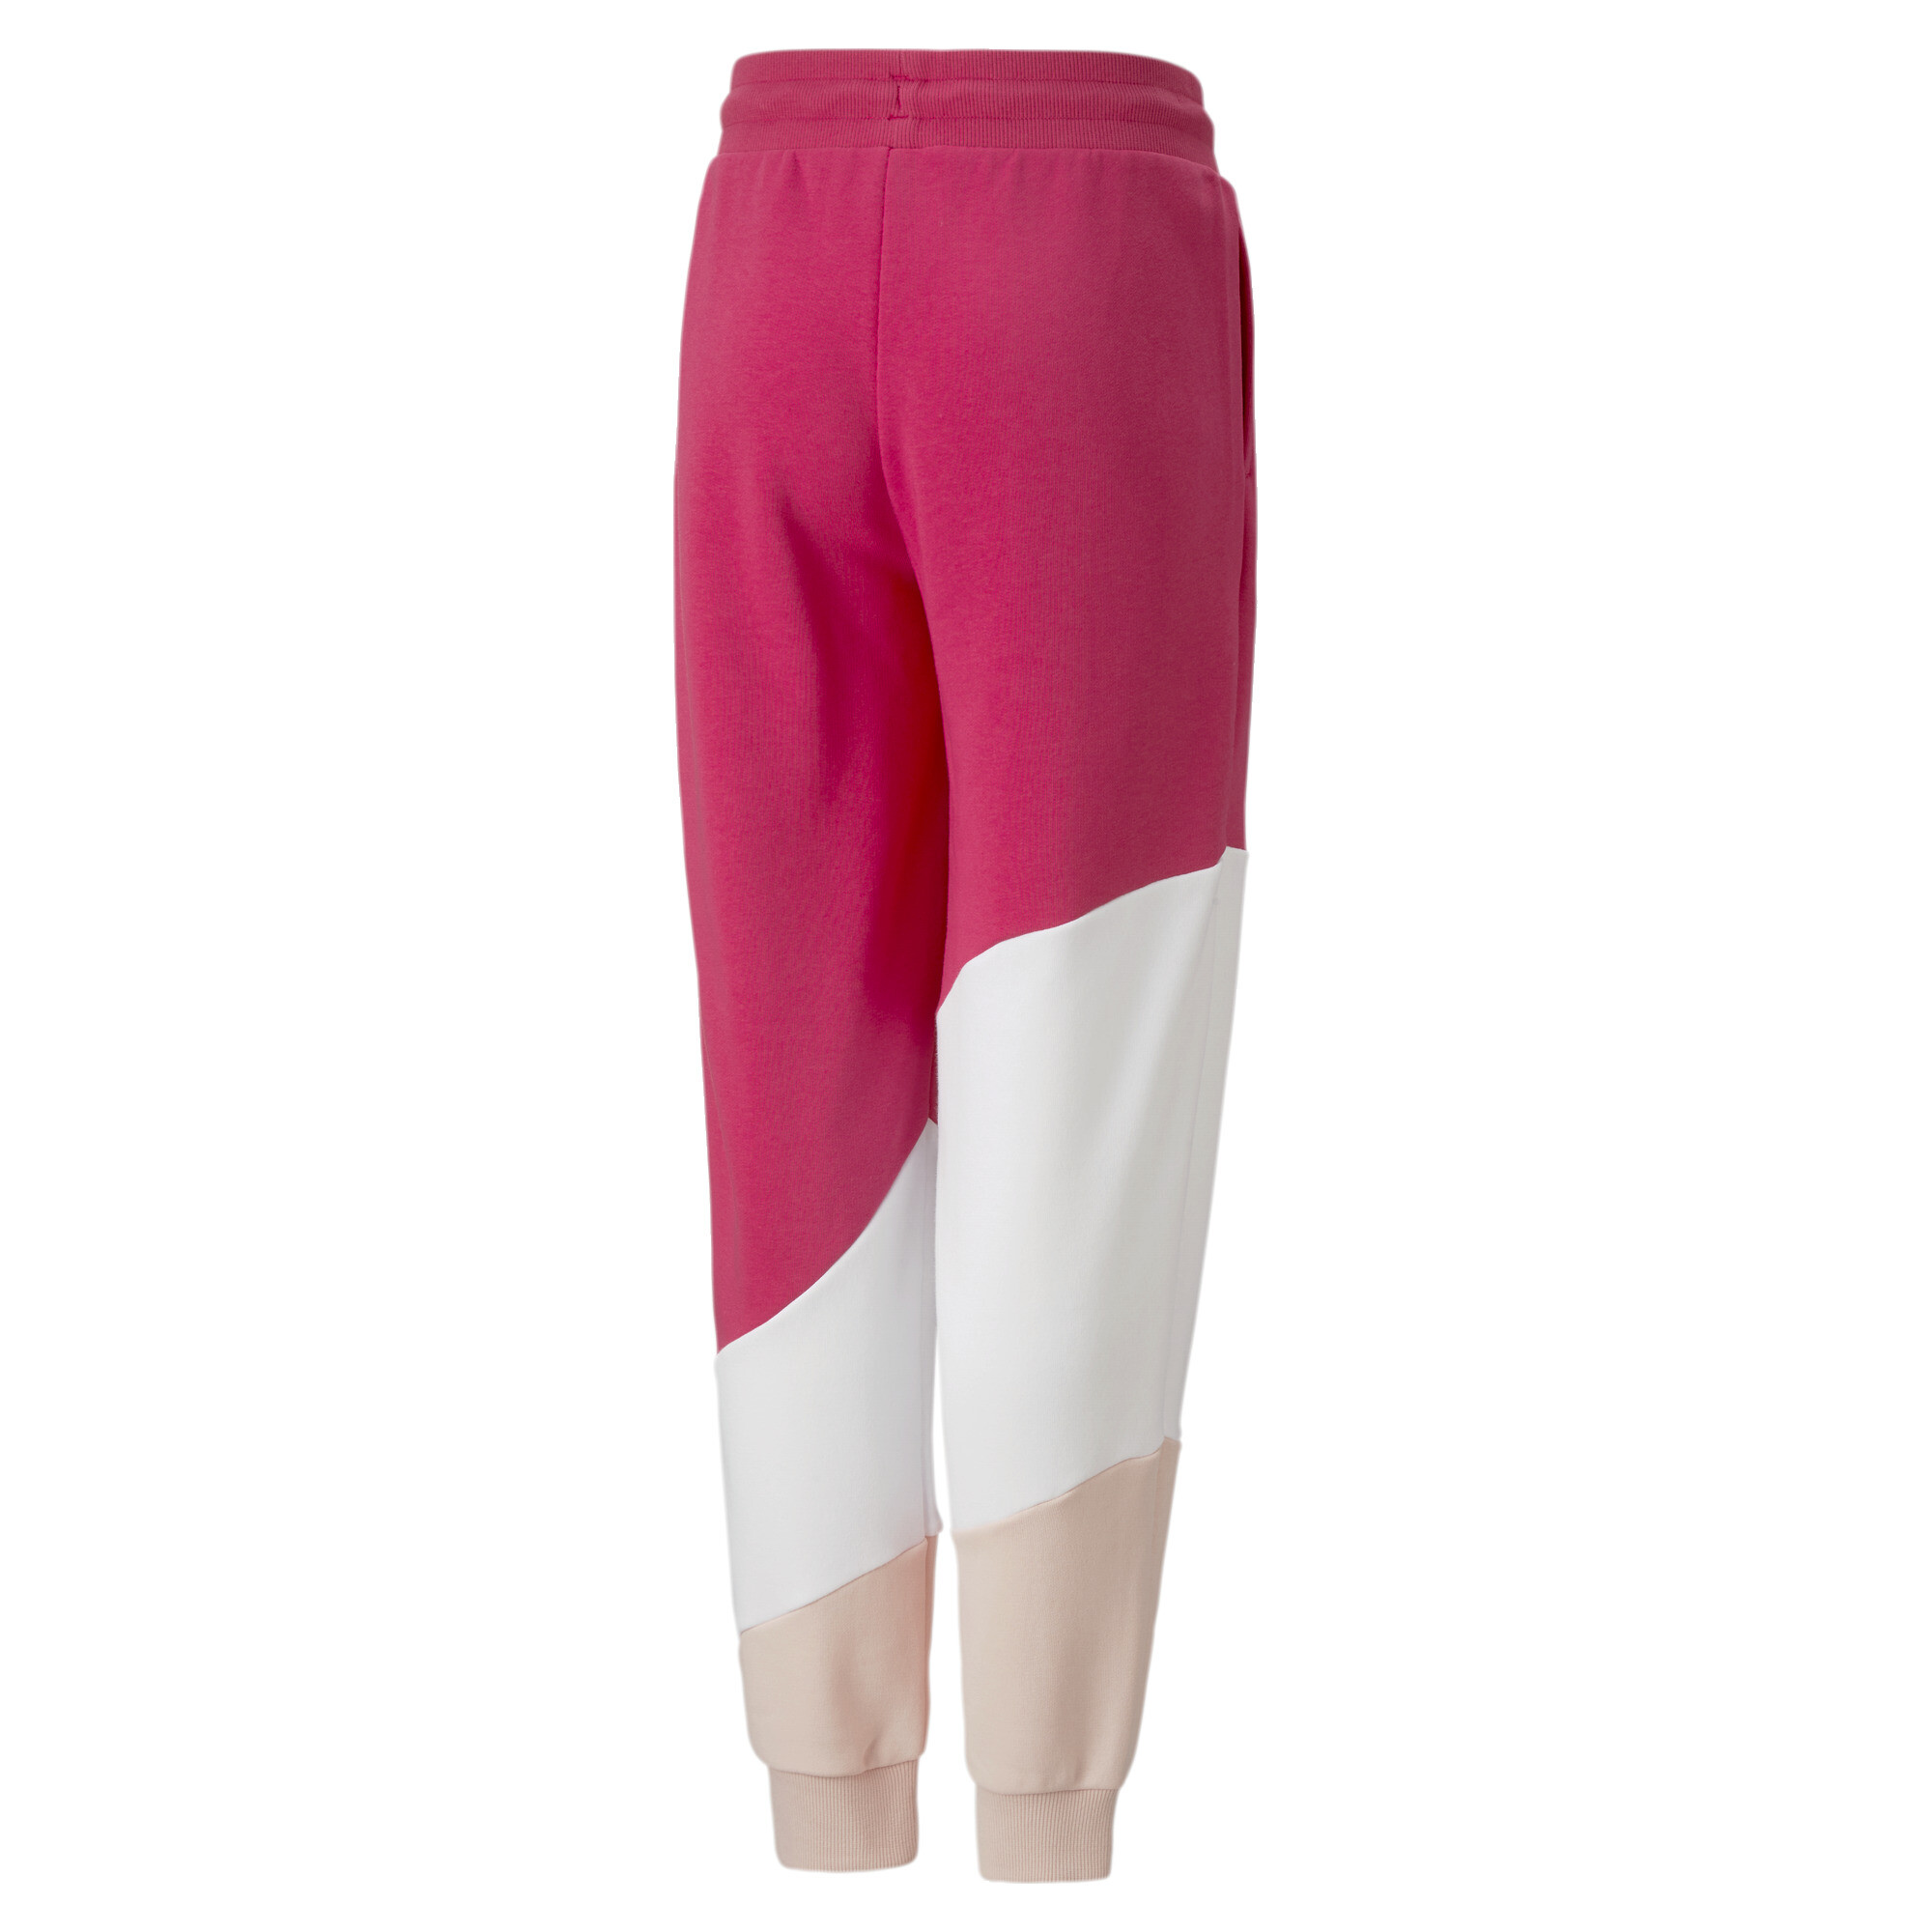 PUMA POWER Cat Pants In Pink, Size 11-12 Youth